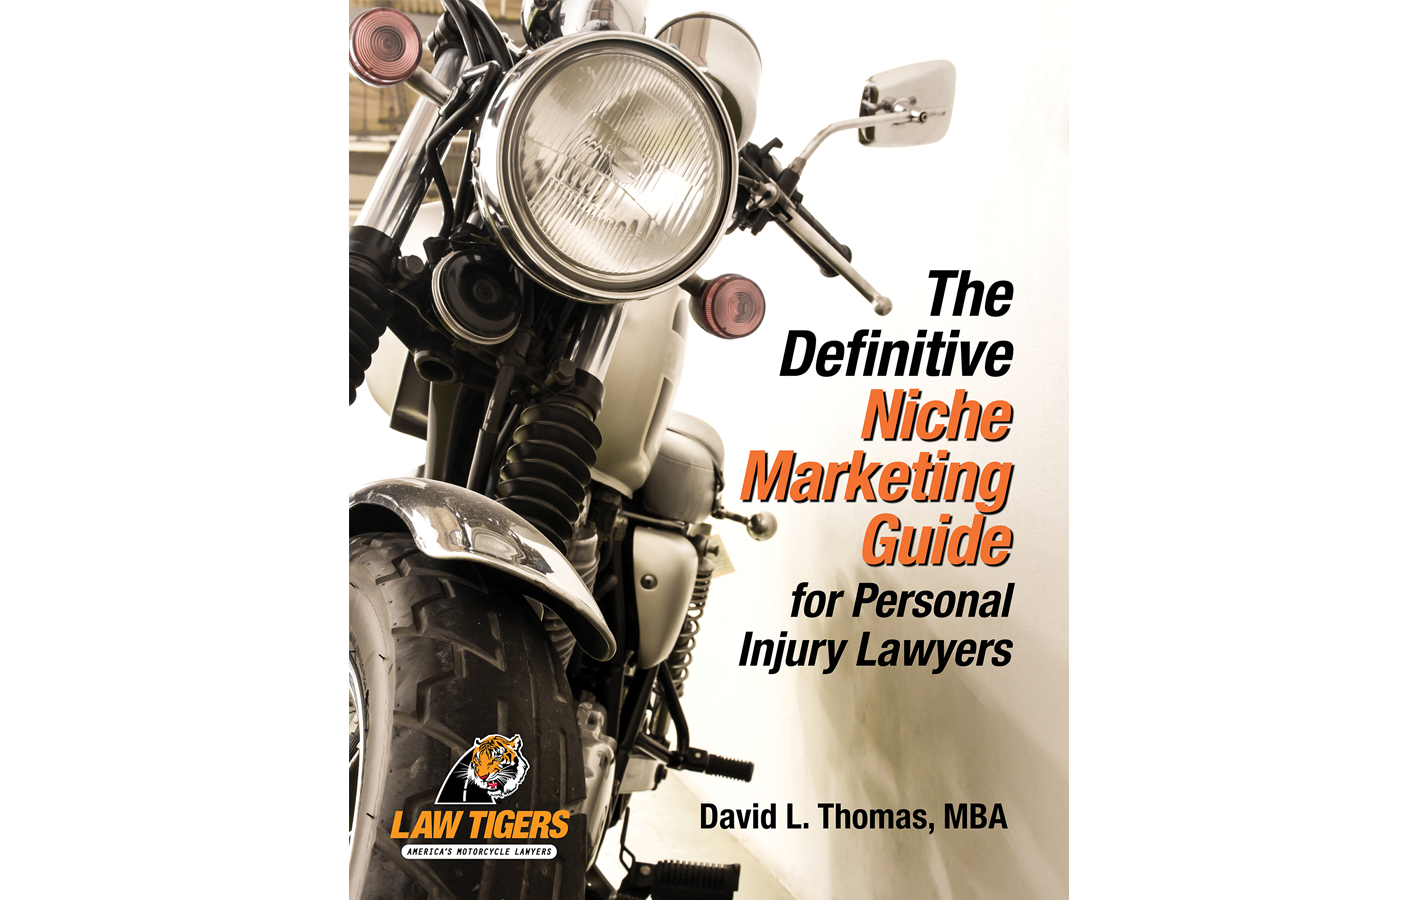 The Definitive Niche Marketing Guide for Personal Injury Lawyers